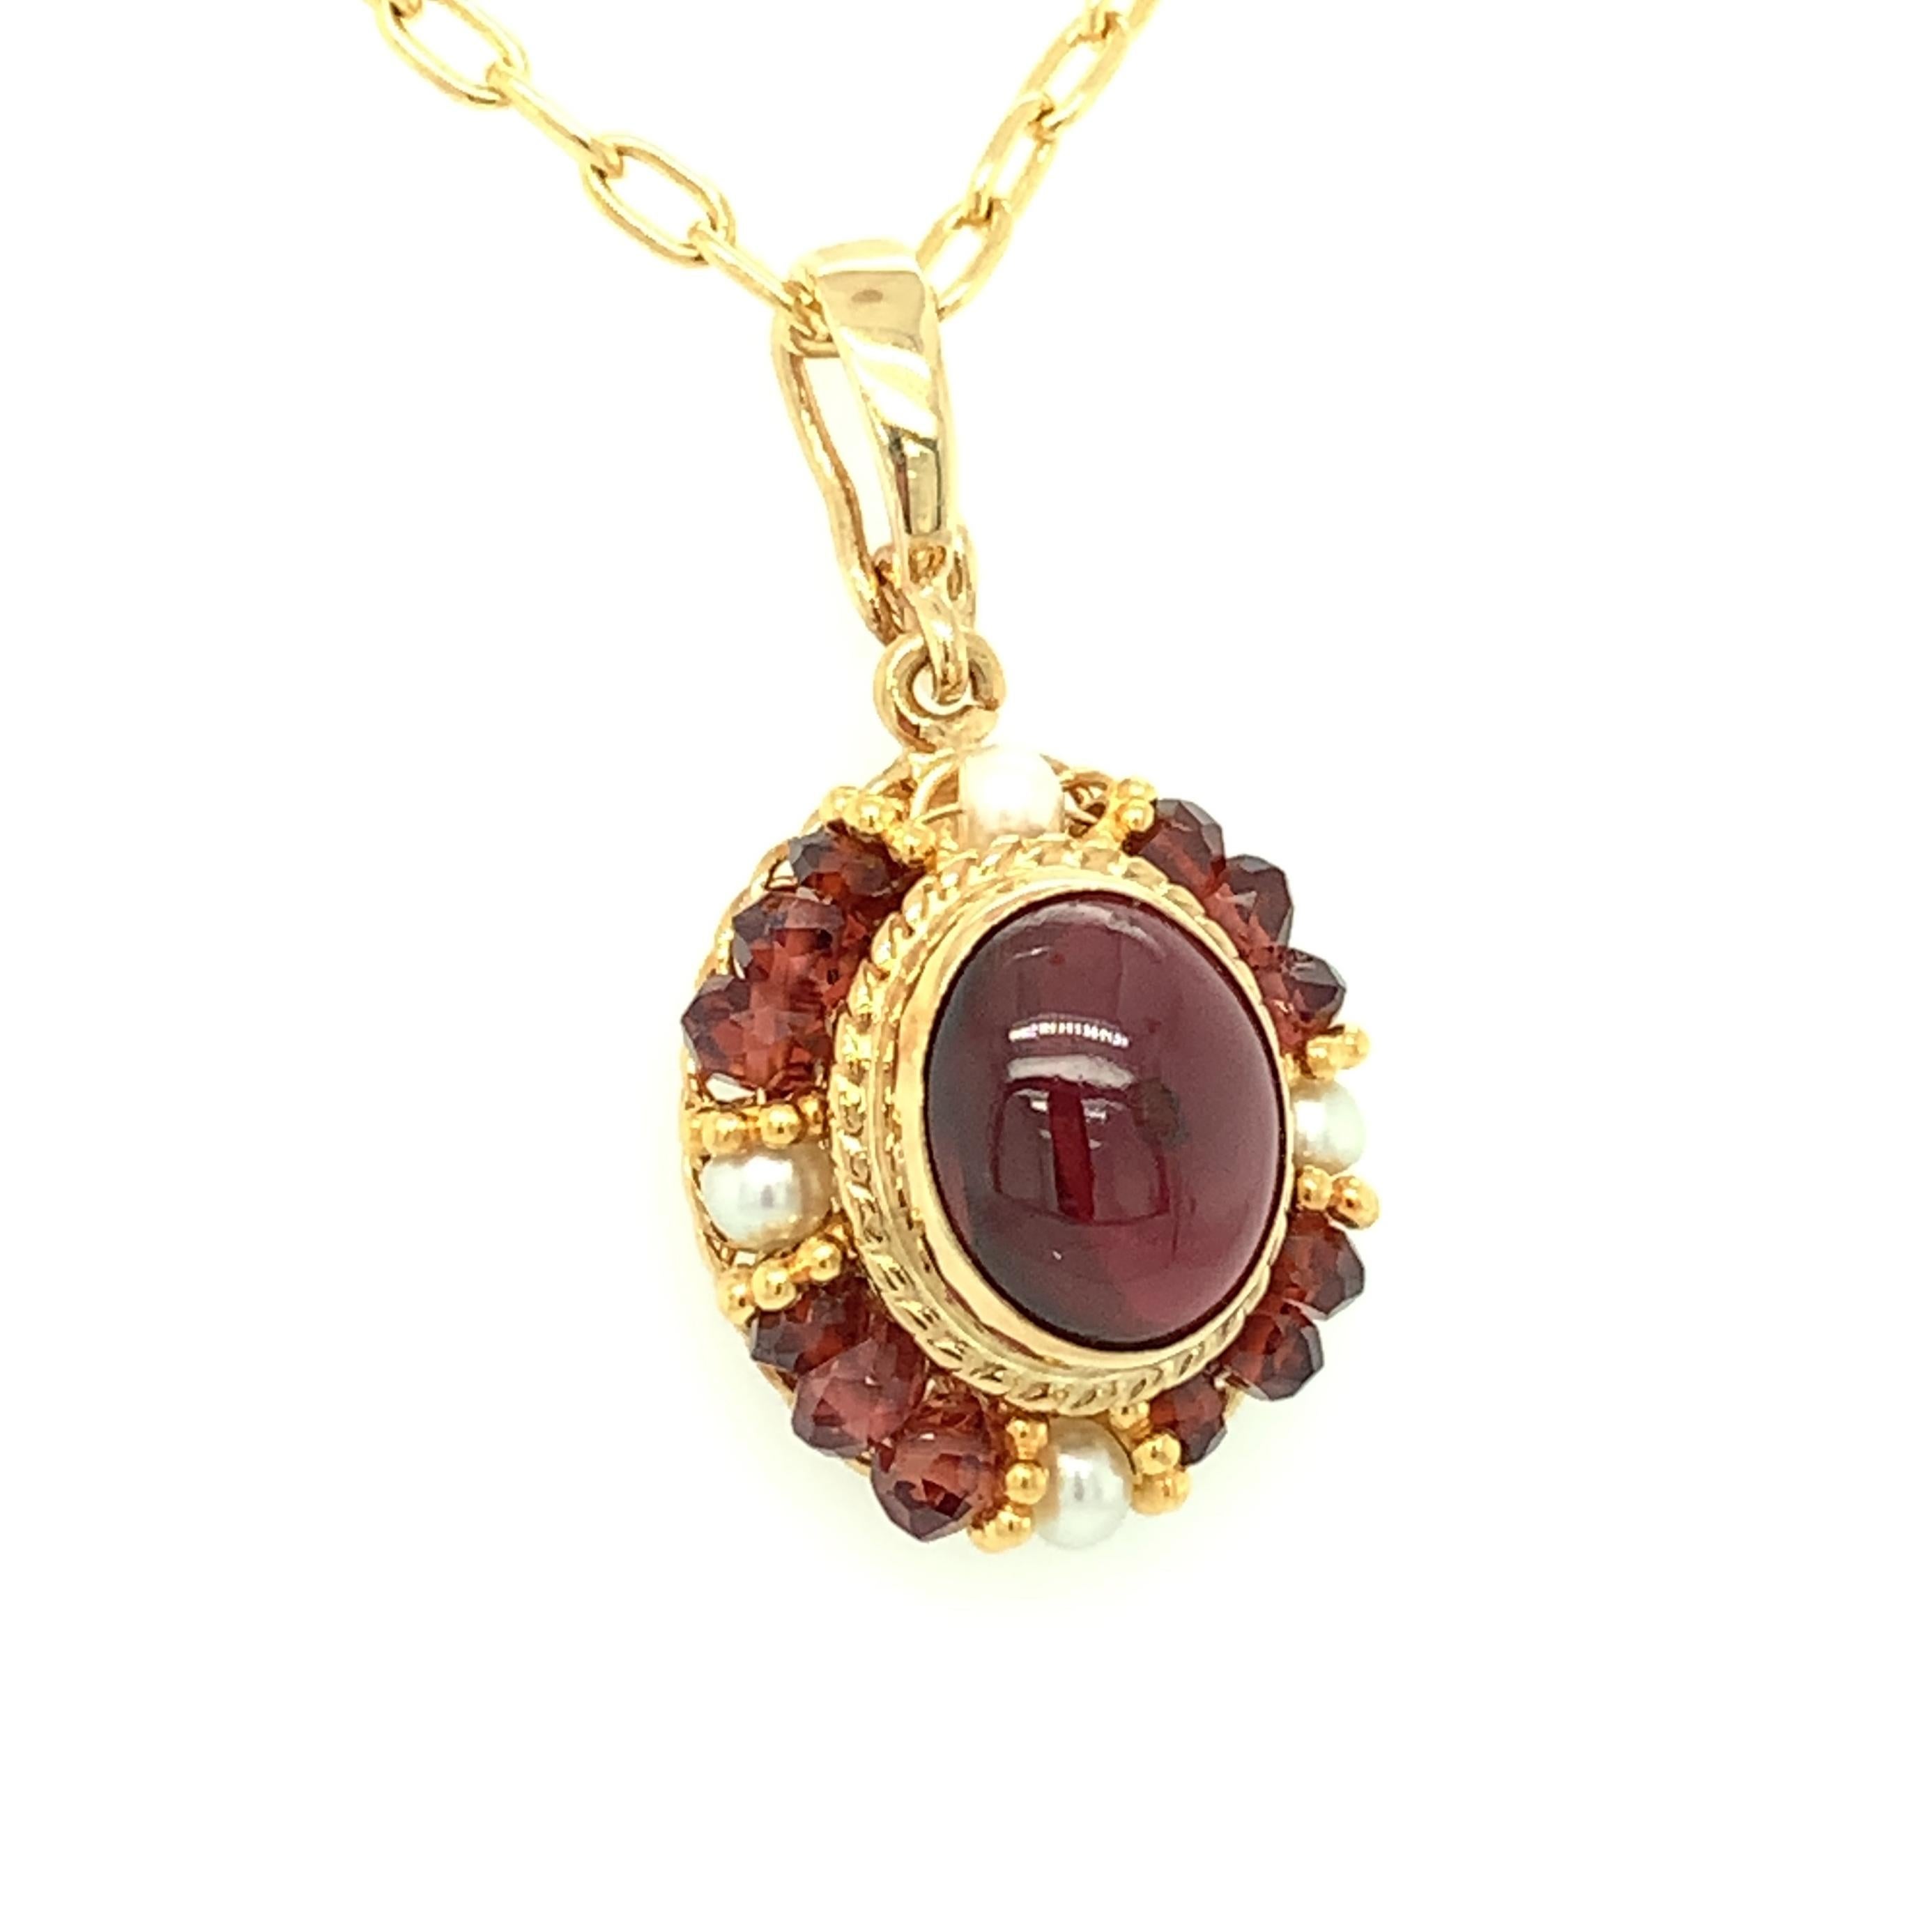 Artisan 2.74 Carat Garnet Cabochon, Garnet Bead and Seed Pearl Filigree Necklace For Sale